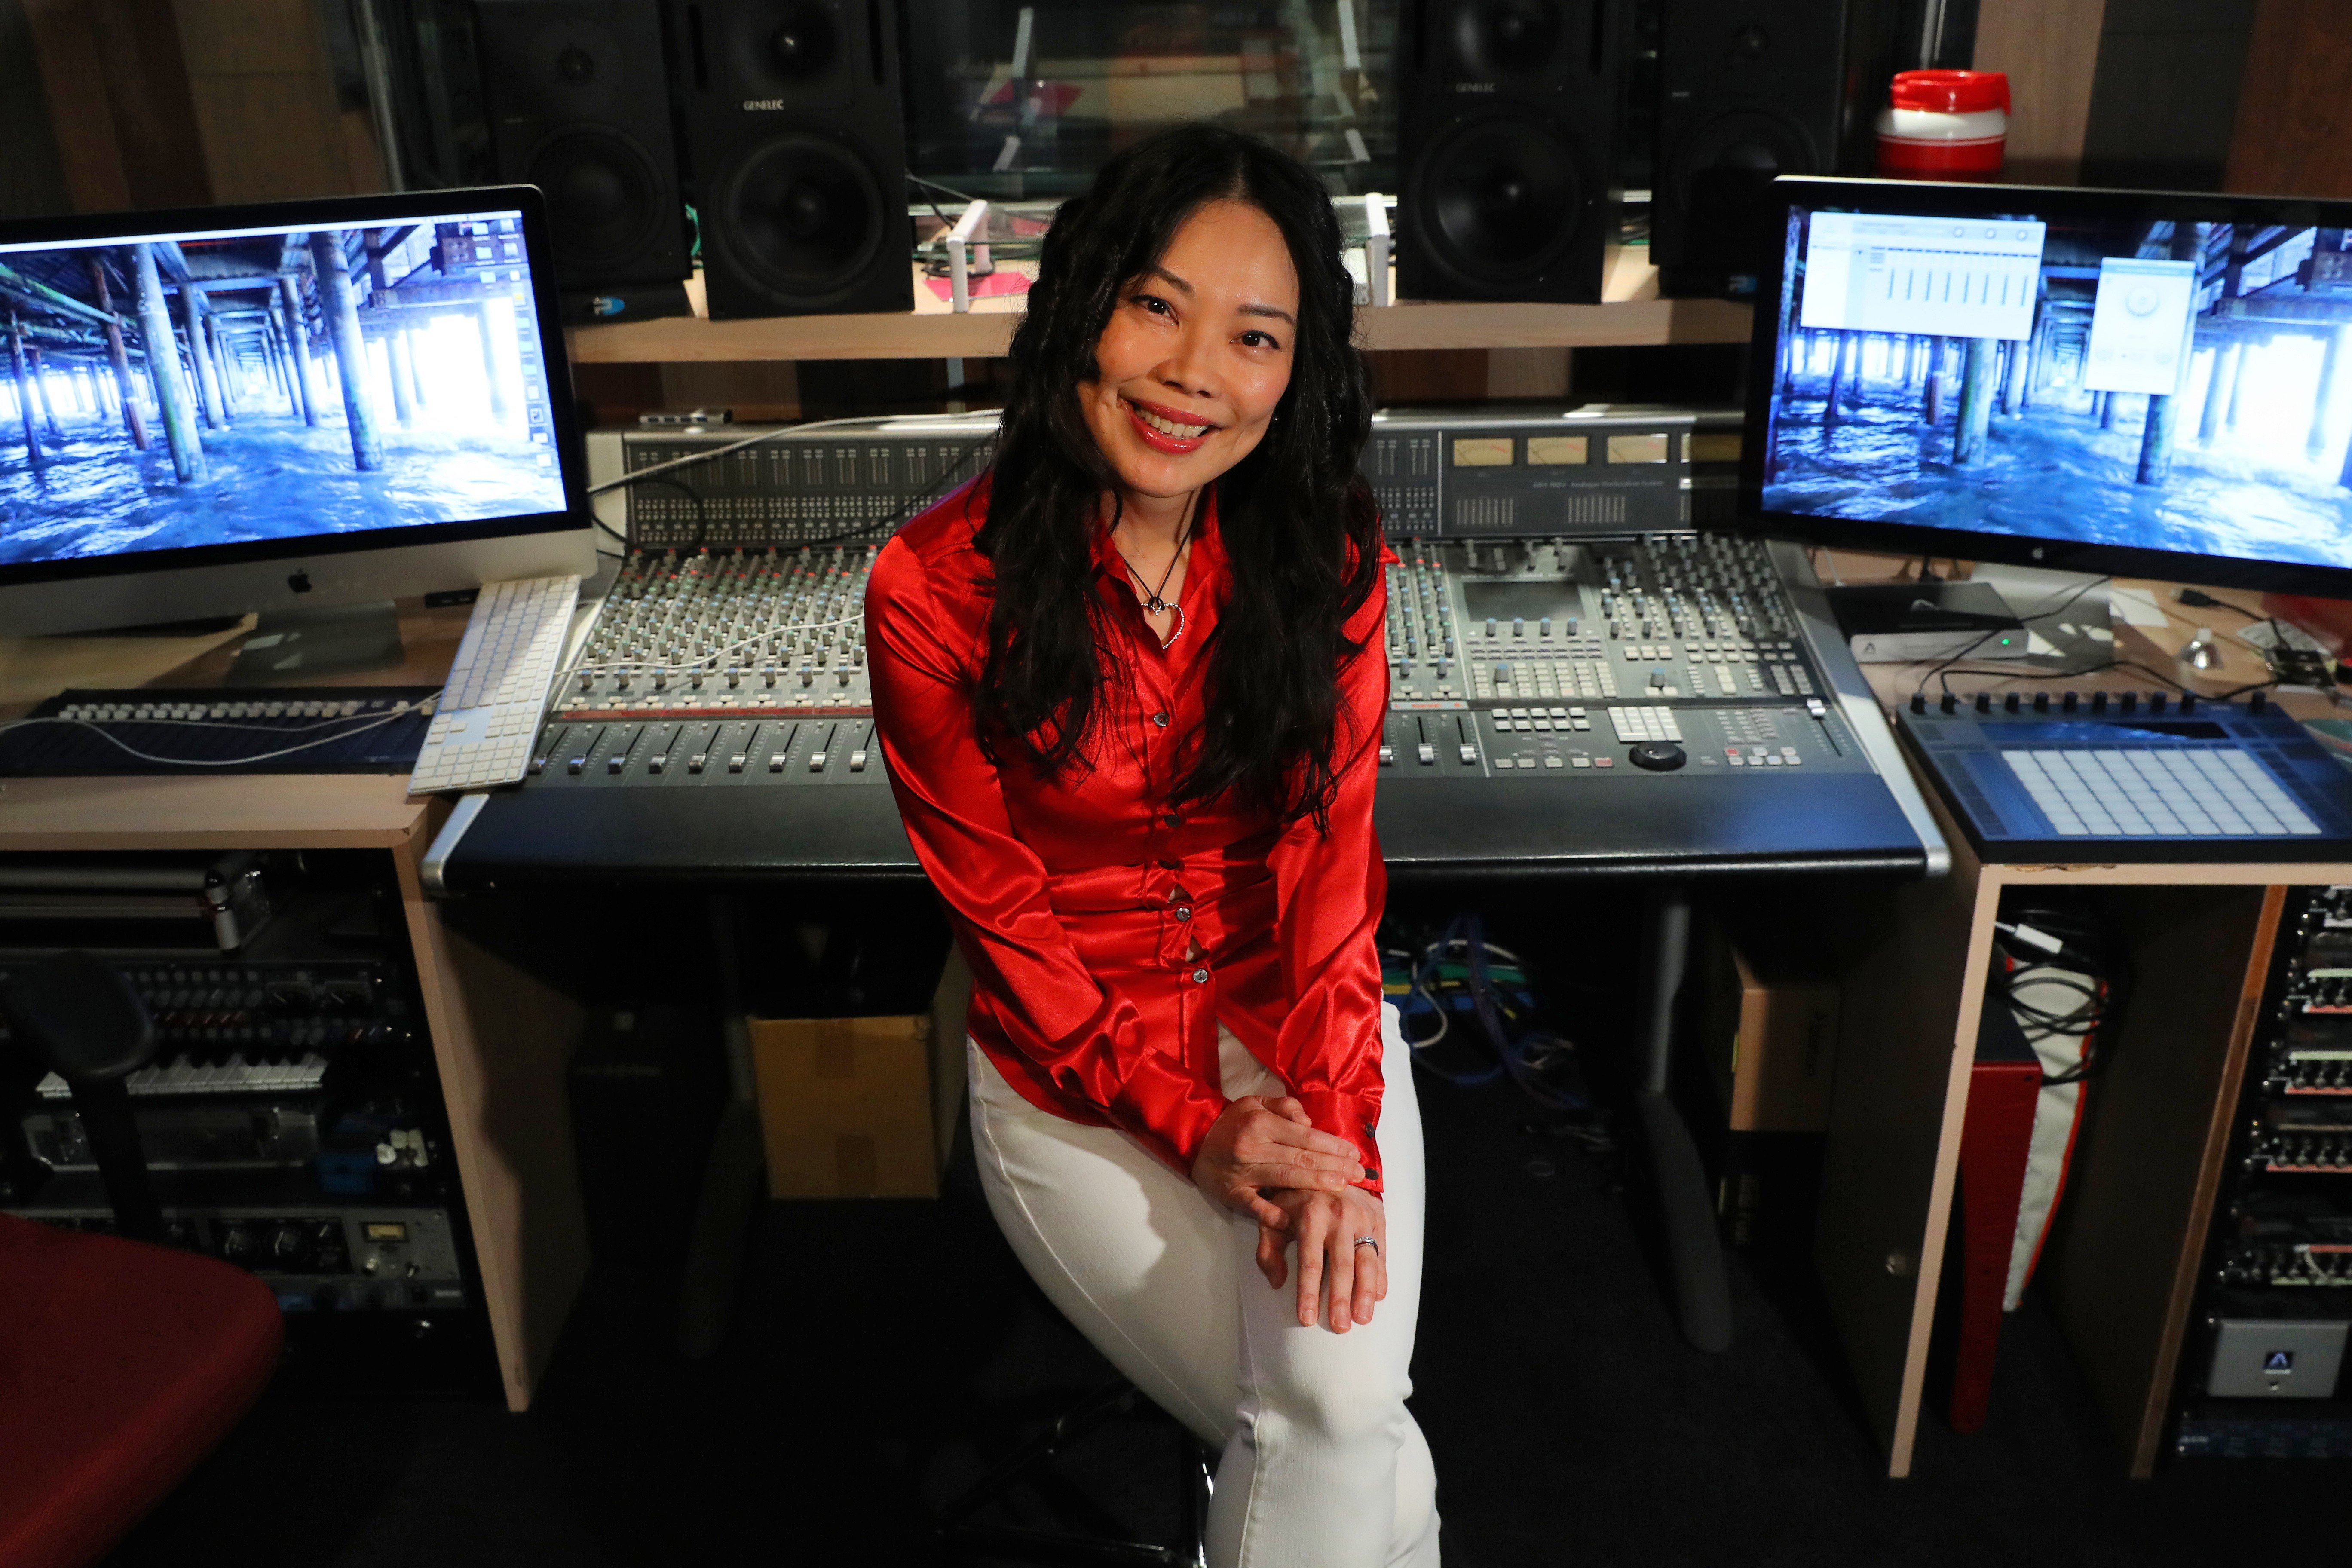 Composer Shirley Choi working on her educational app Migalolo for kids. Photo: Edmond So